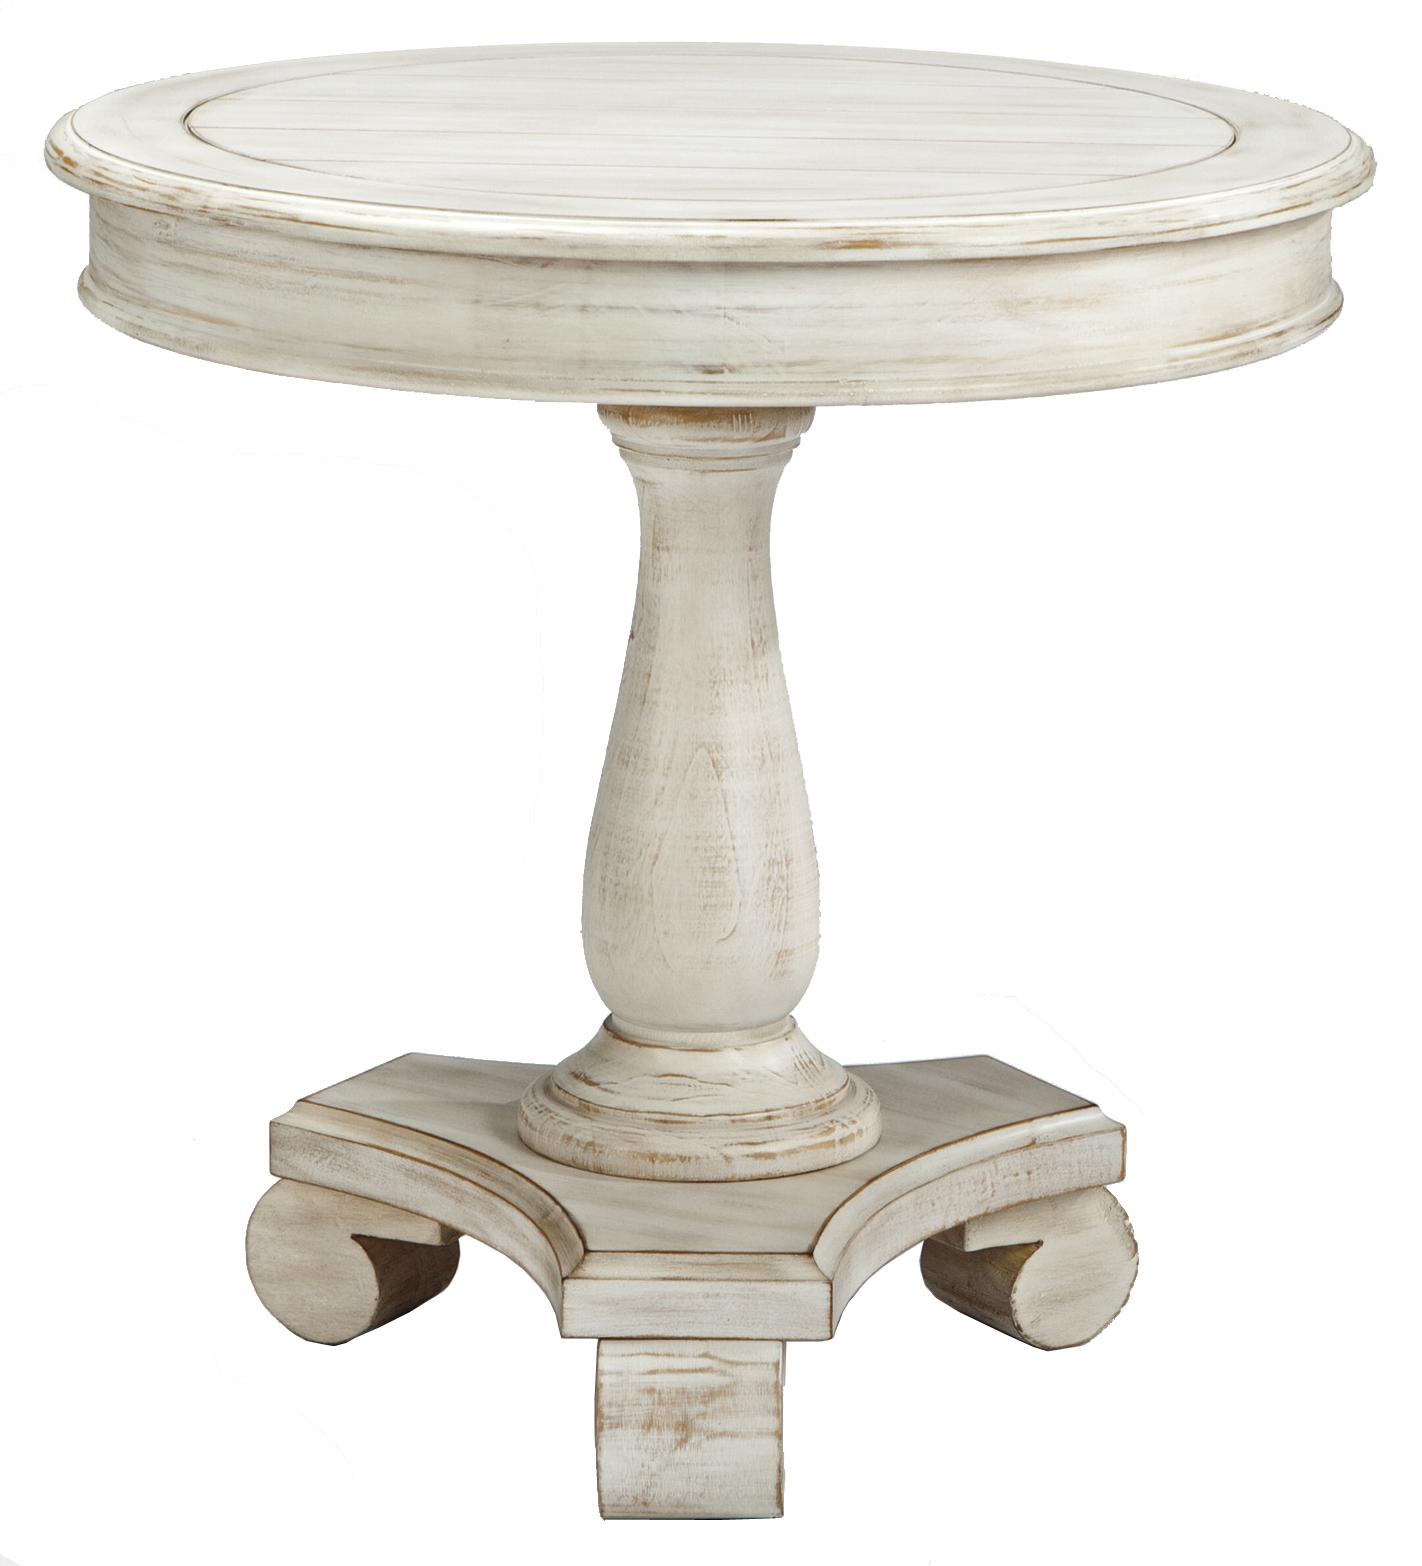 signature design ashley mirimyn round accent table with turned products color cottage accents distressed corner drawer small cream side outdoor chair wood coffee patio dining set